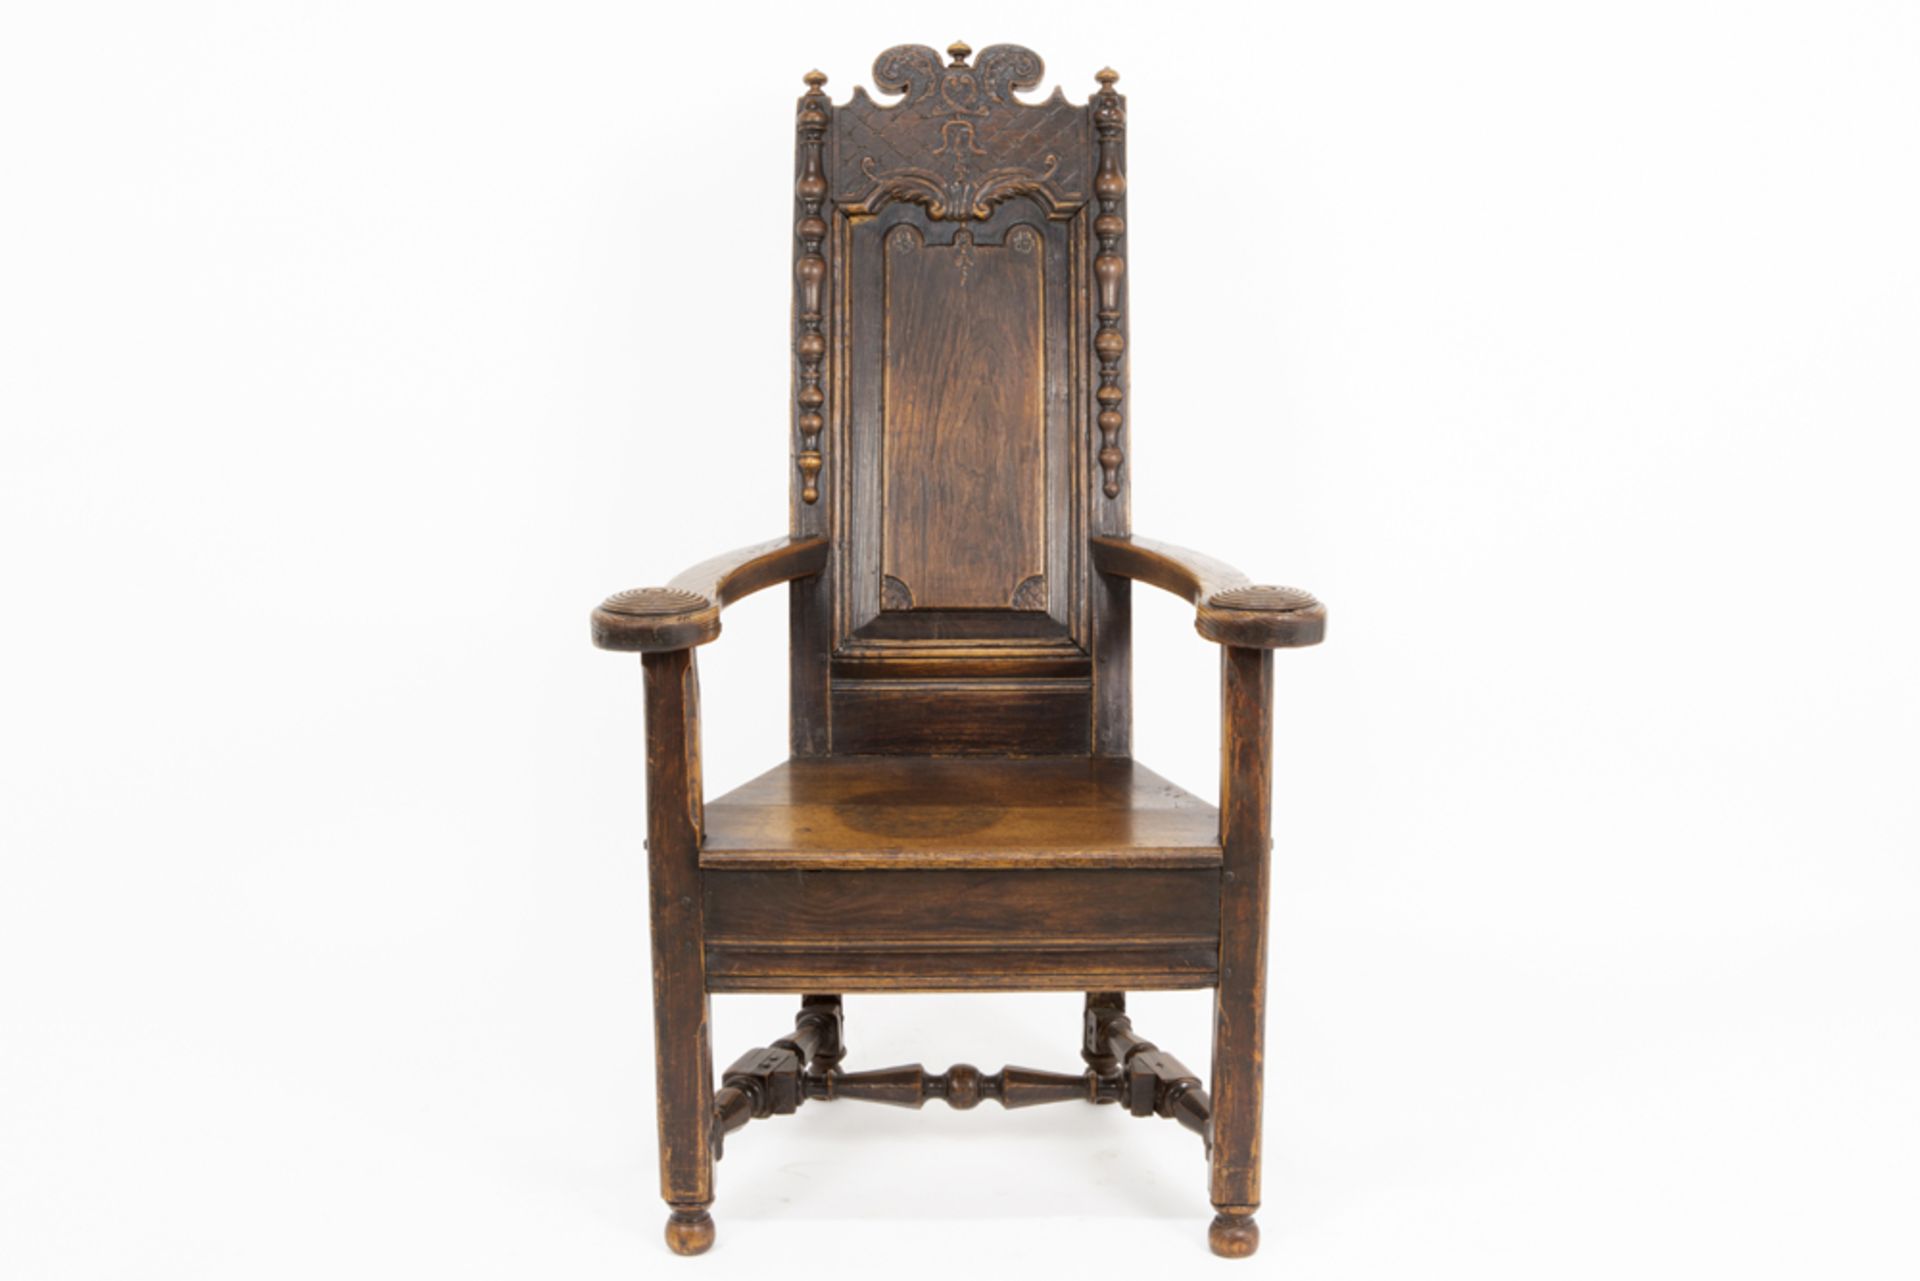 antique oak armchair with carved Régence ornamentation and dated 1766 on the back || Antieke